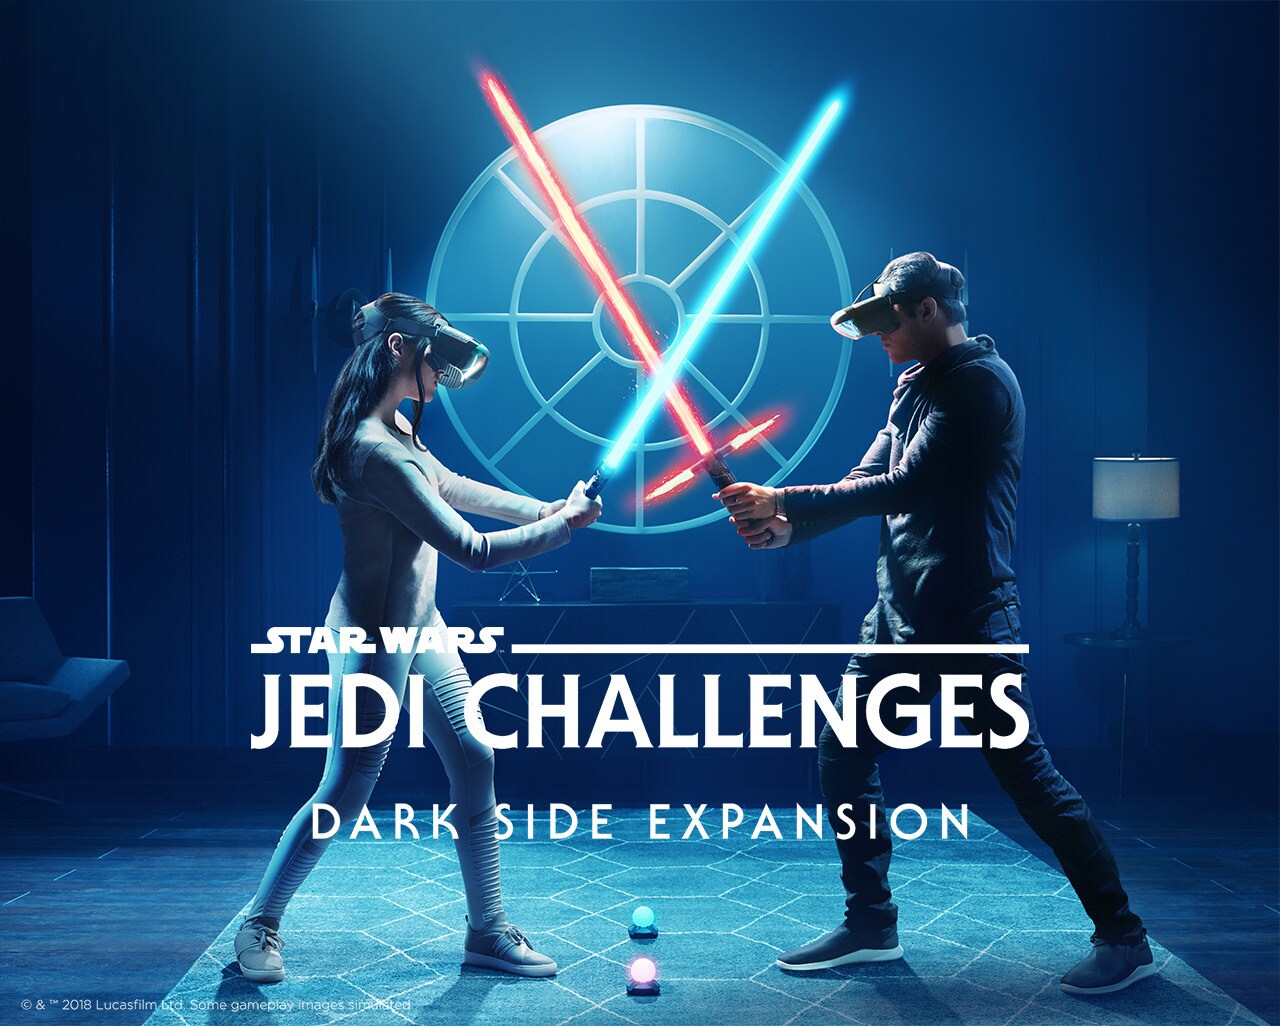 Two players cross lightsabers while playing Star Wars: Jedi Challenges.